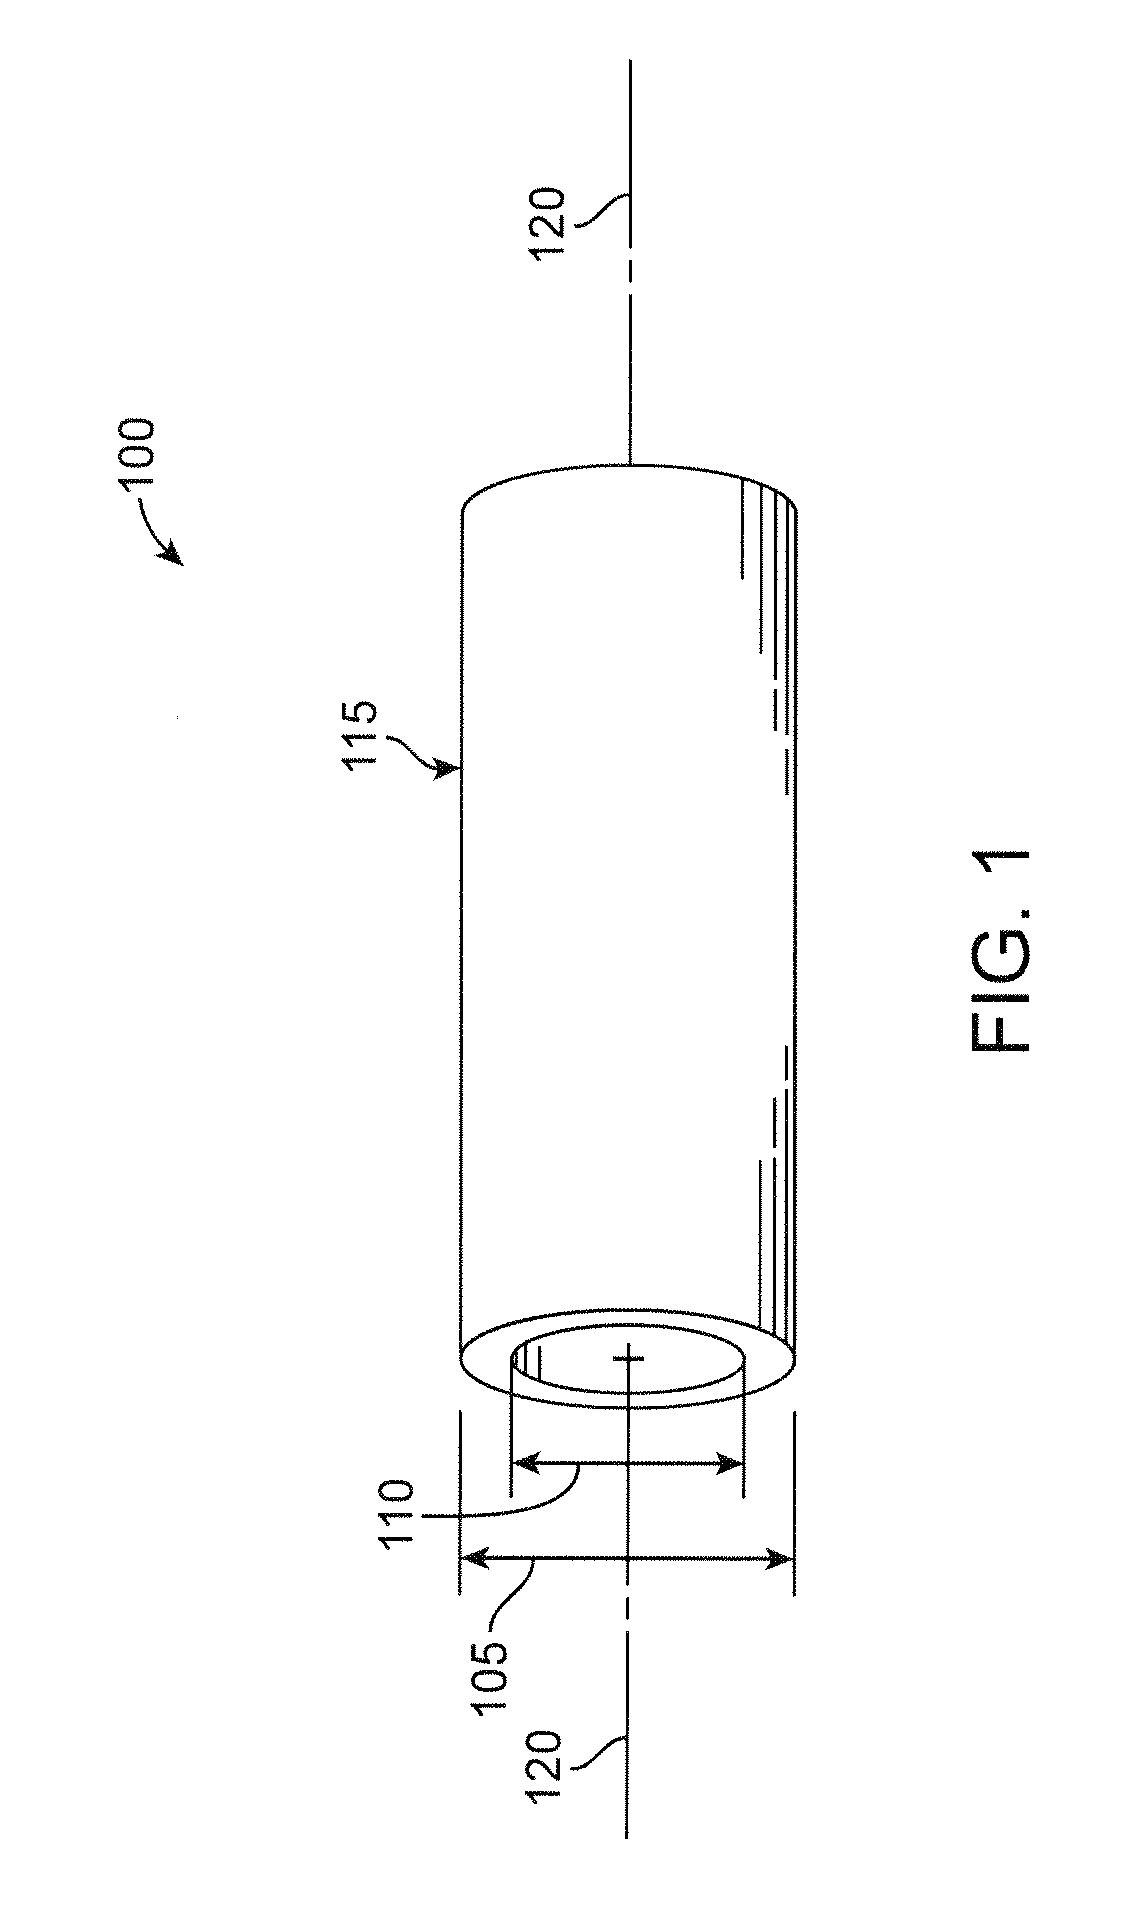 Crush Recoverable Polymer Scaffolds